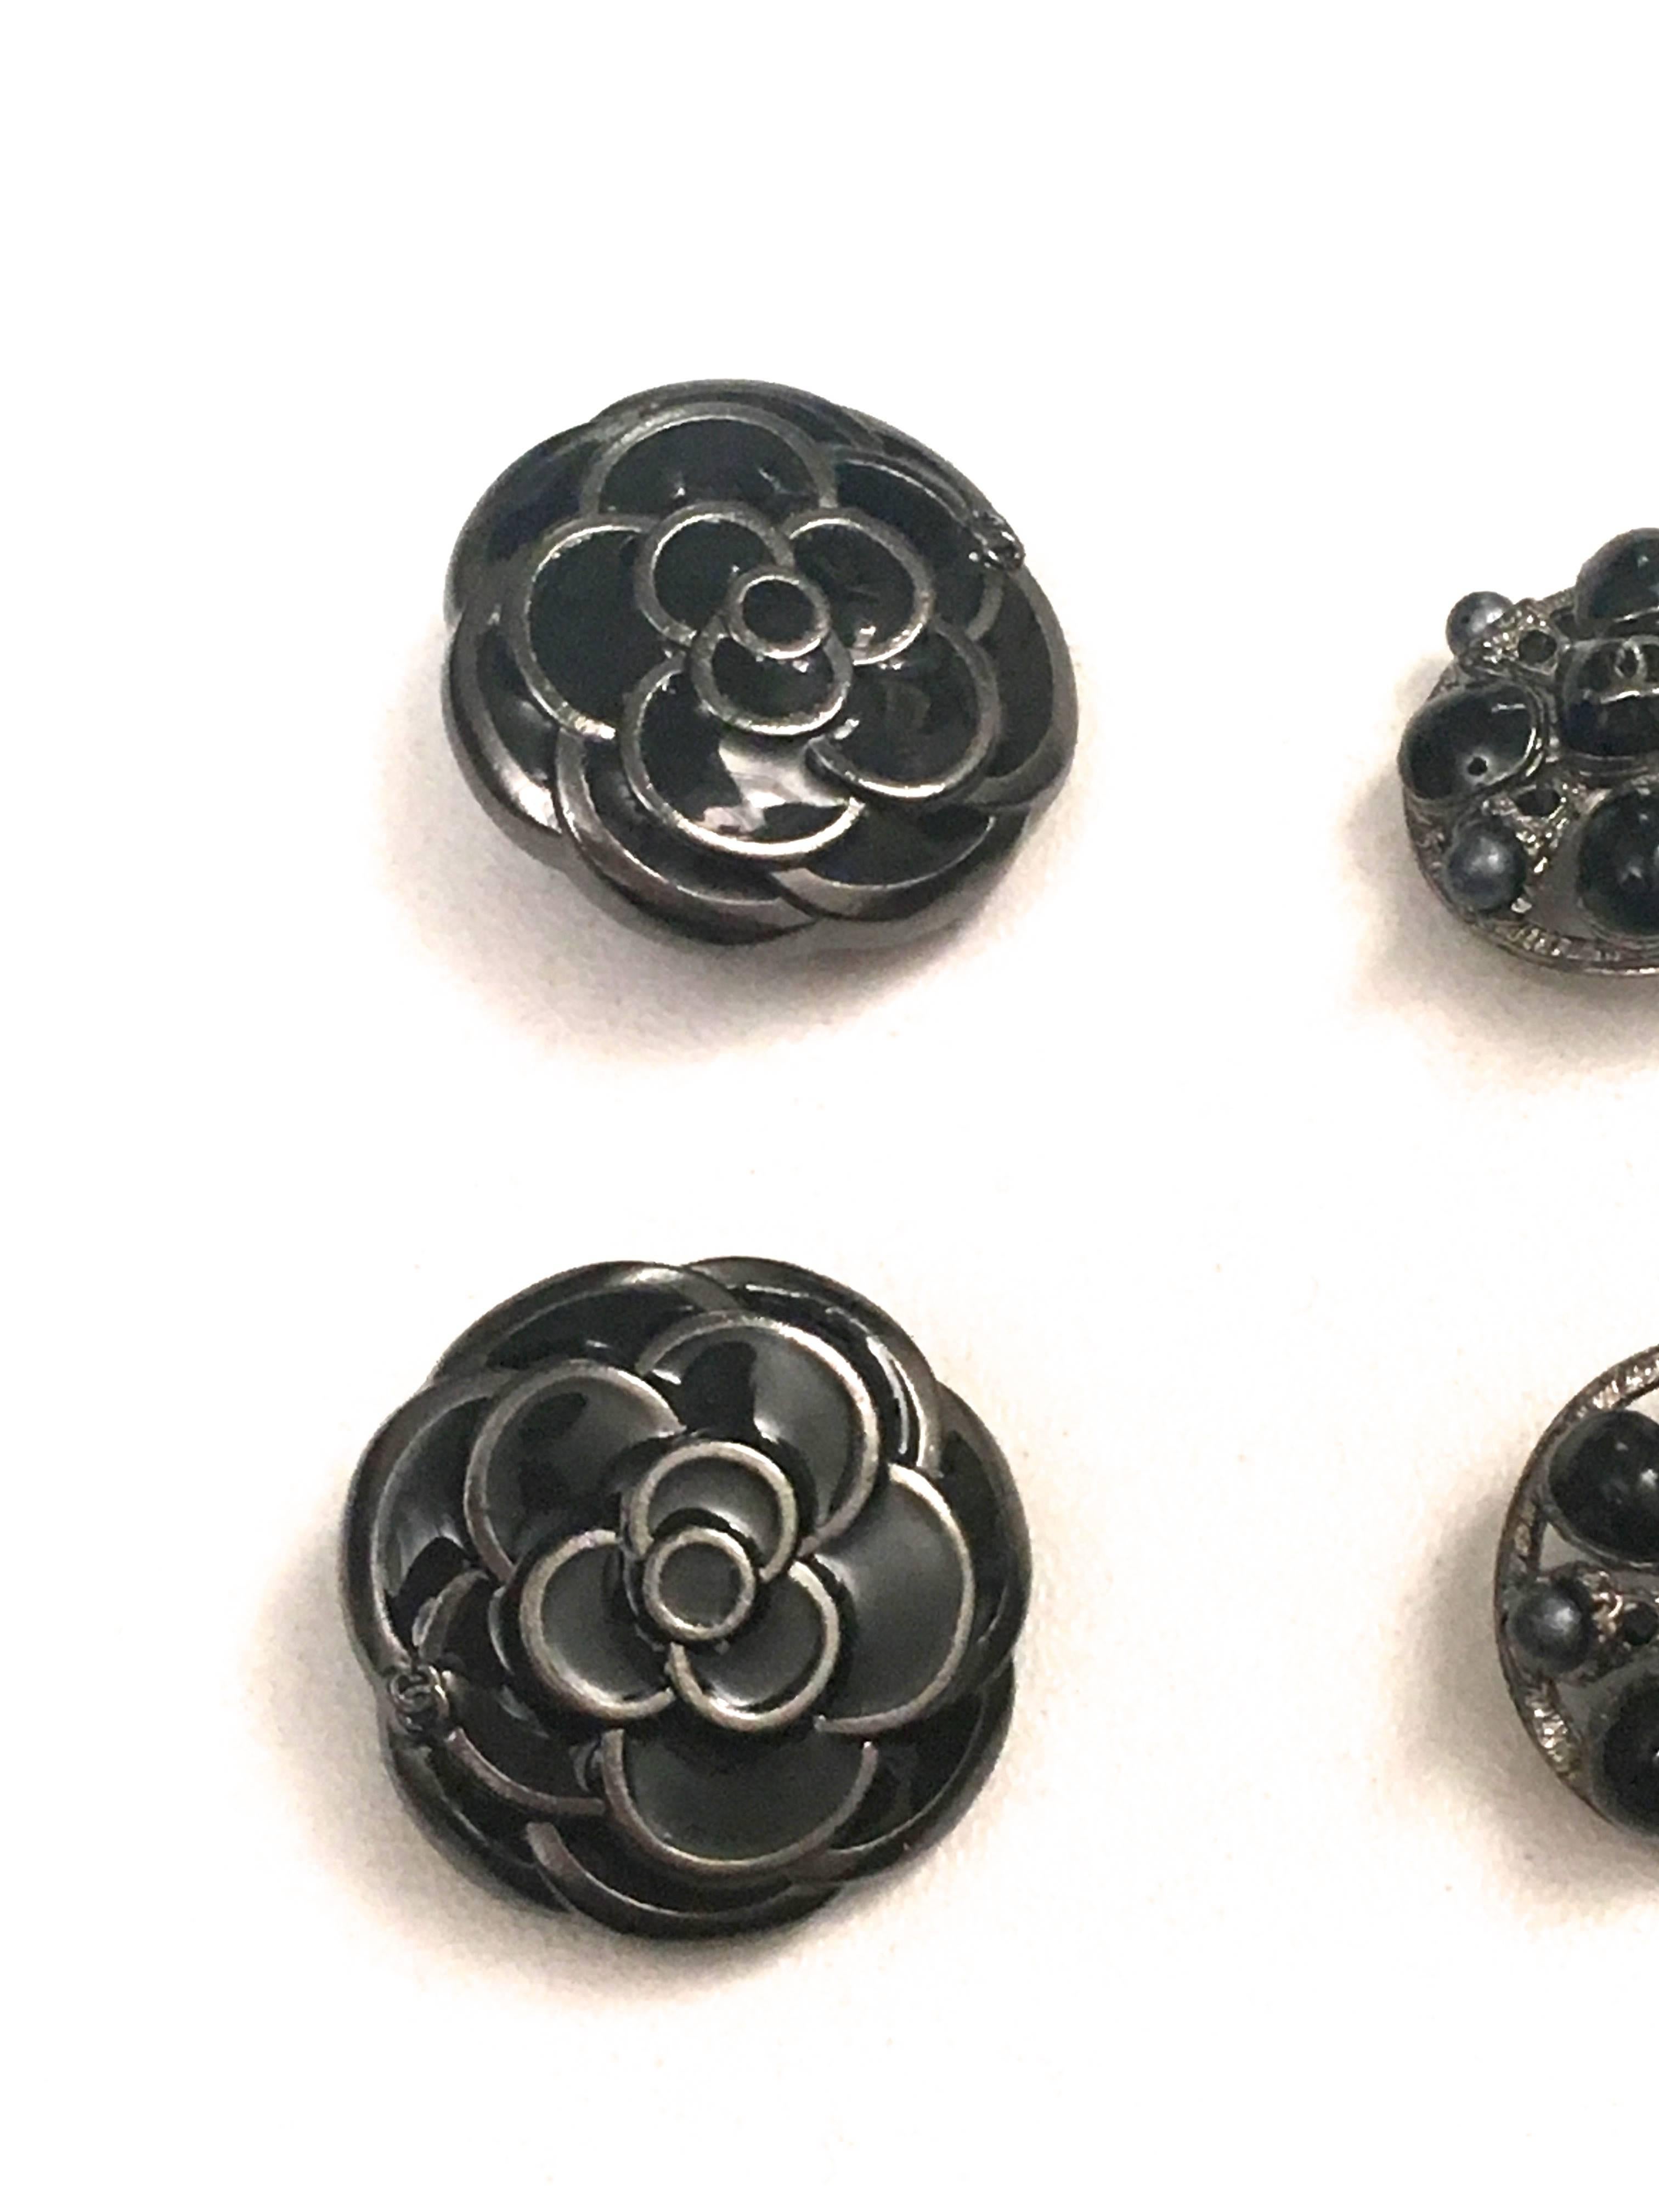 Presented here is a gorgeous assortment of six buttons from Chanel Paris. The buttons are as follows:
- 2 buttons that are silver tone buttons with a gray patina. They have an engraved CC logo at the center of each button front. Around the border of